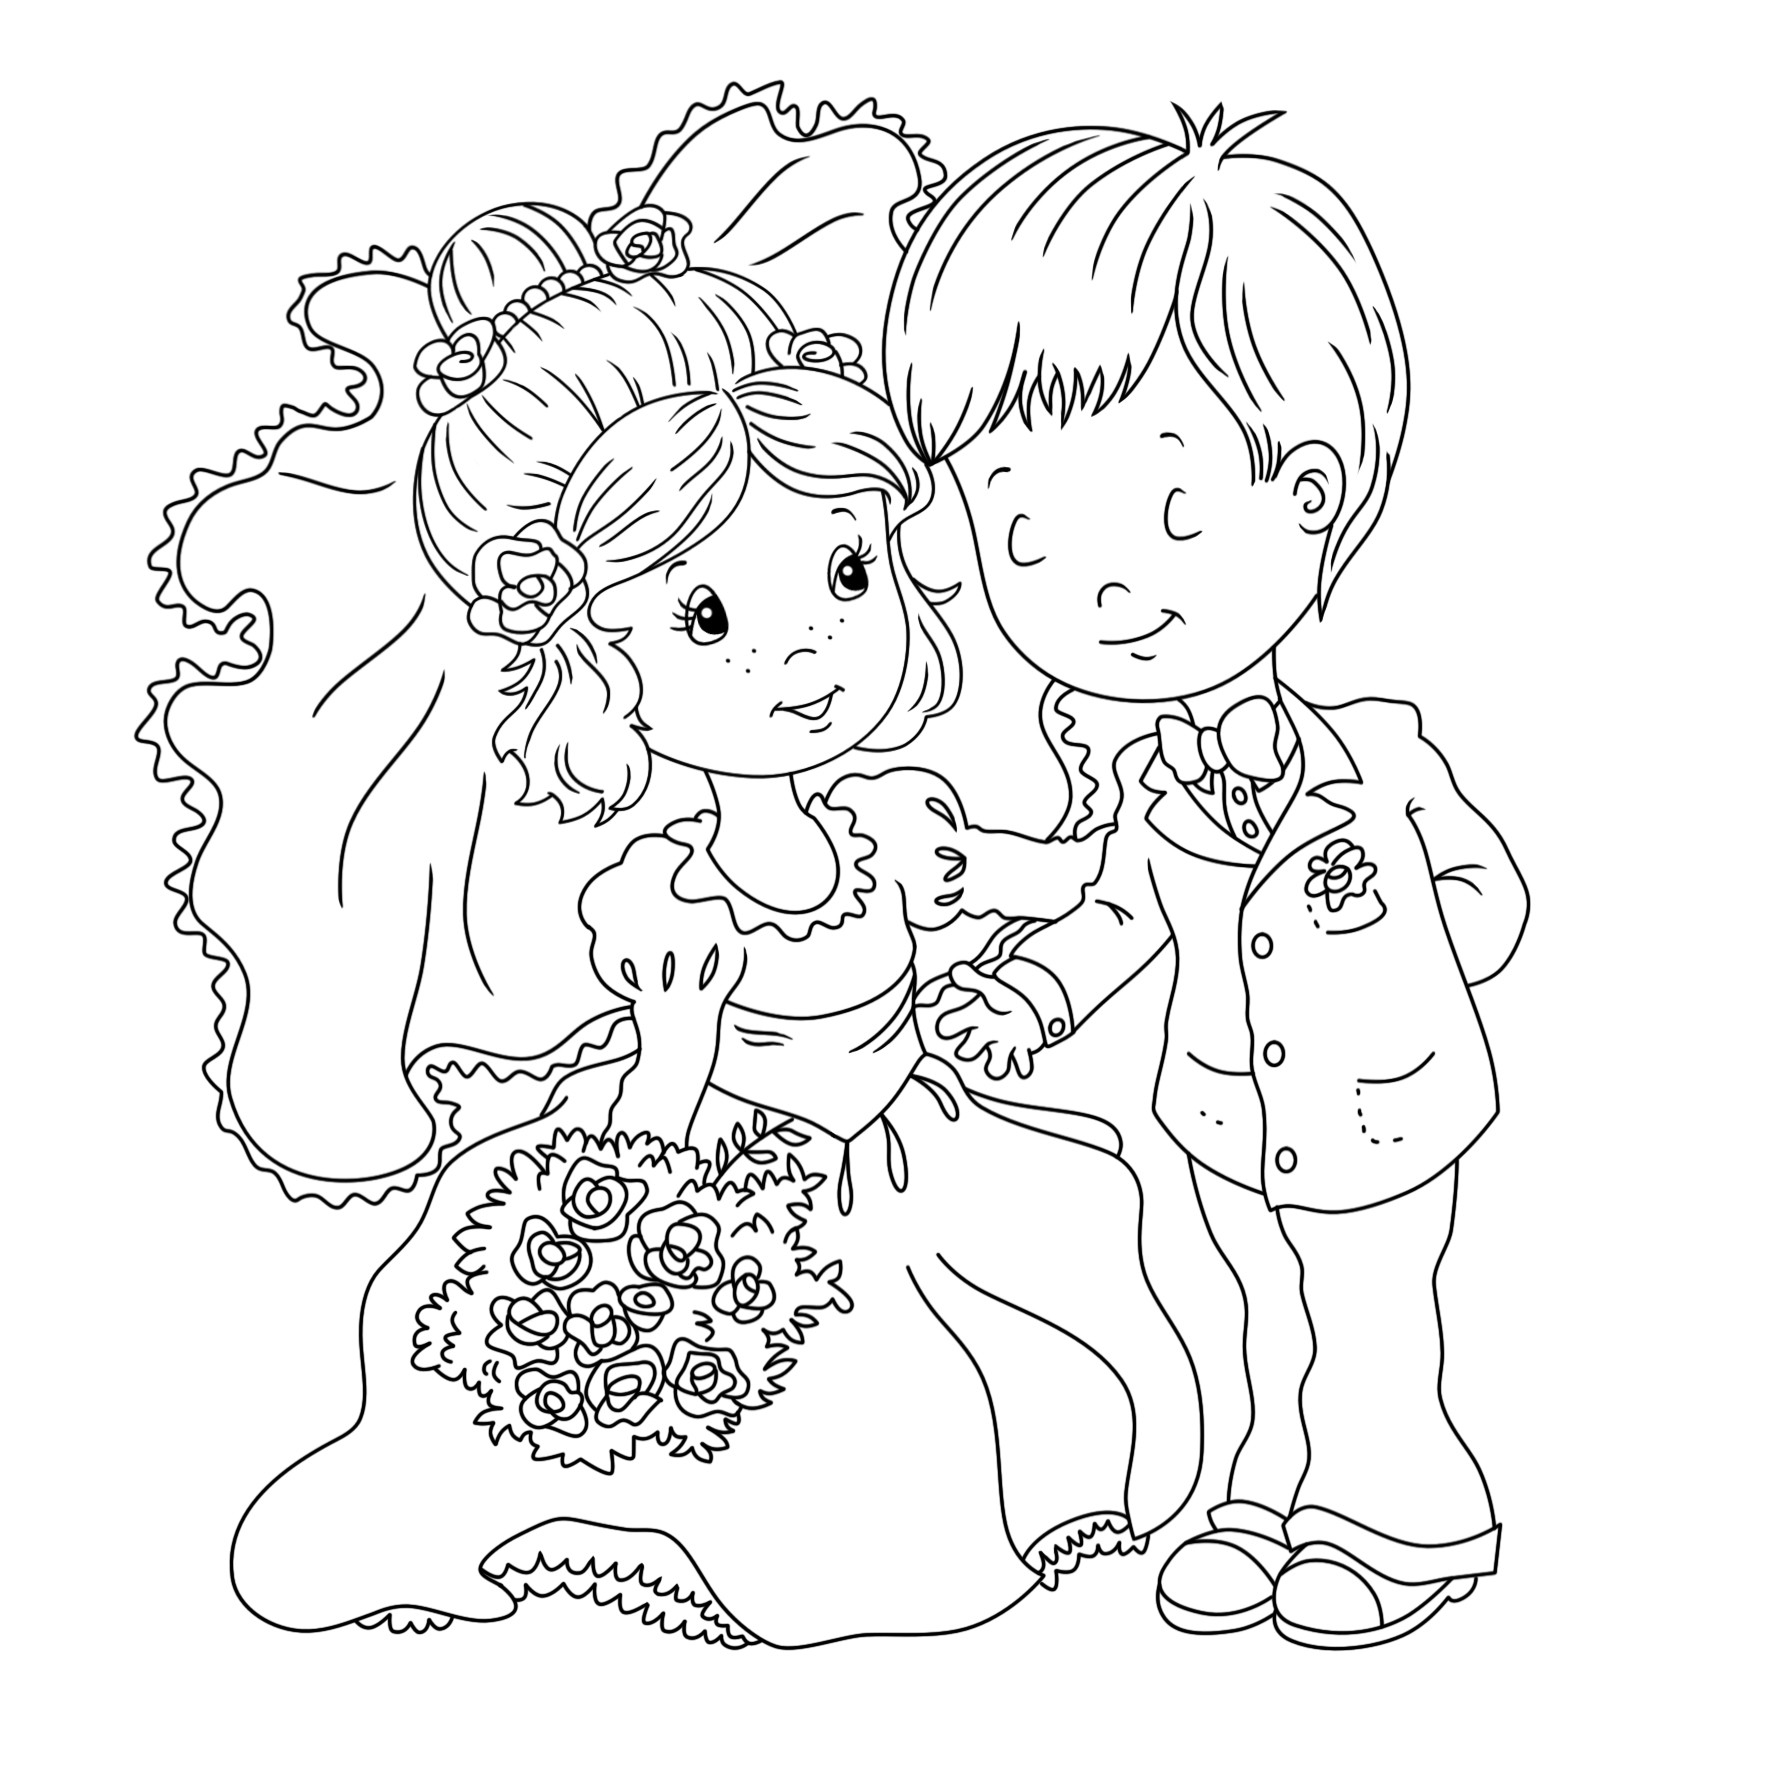 Wedding Coloring Book For Kids
 Wedding Coloring Pages Best Coloring Pages For Kids